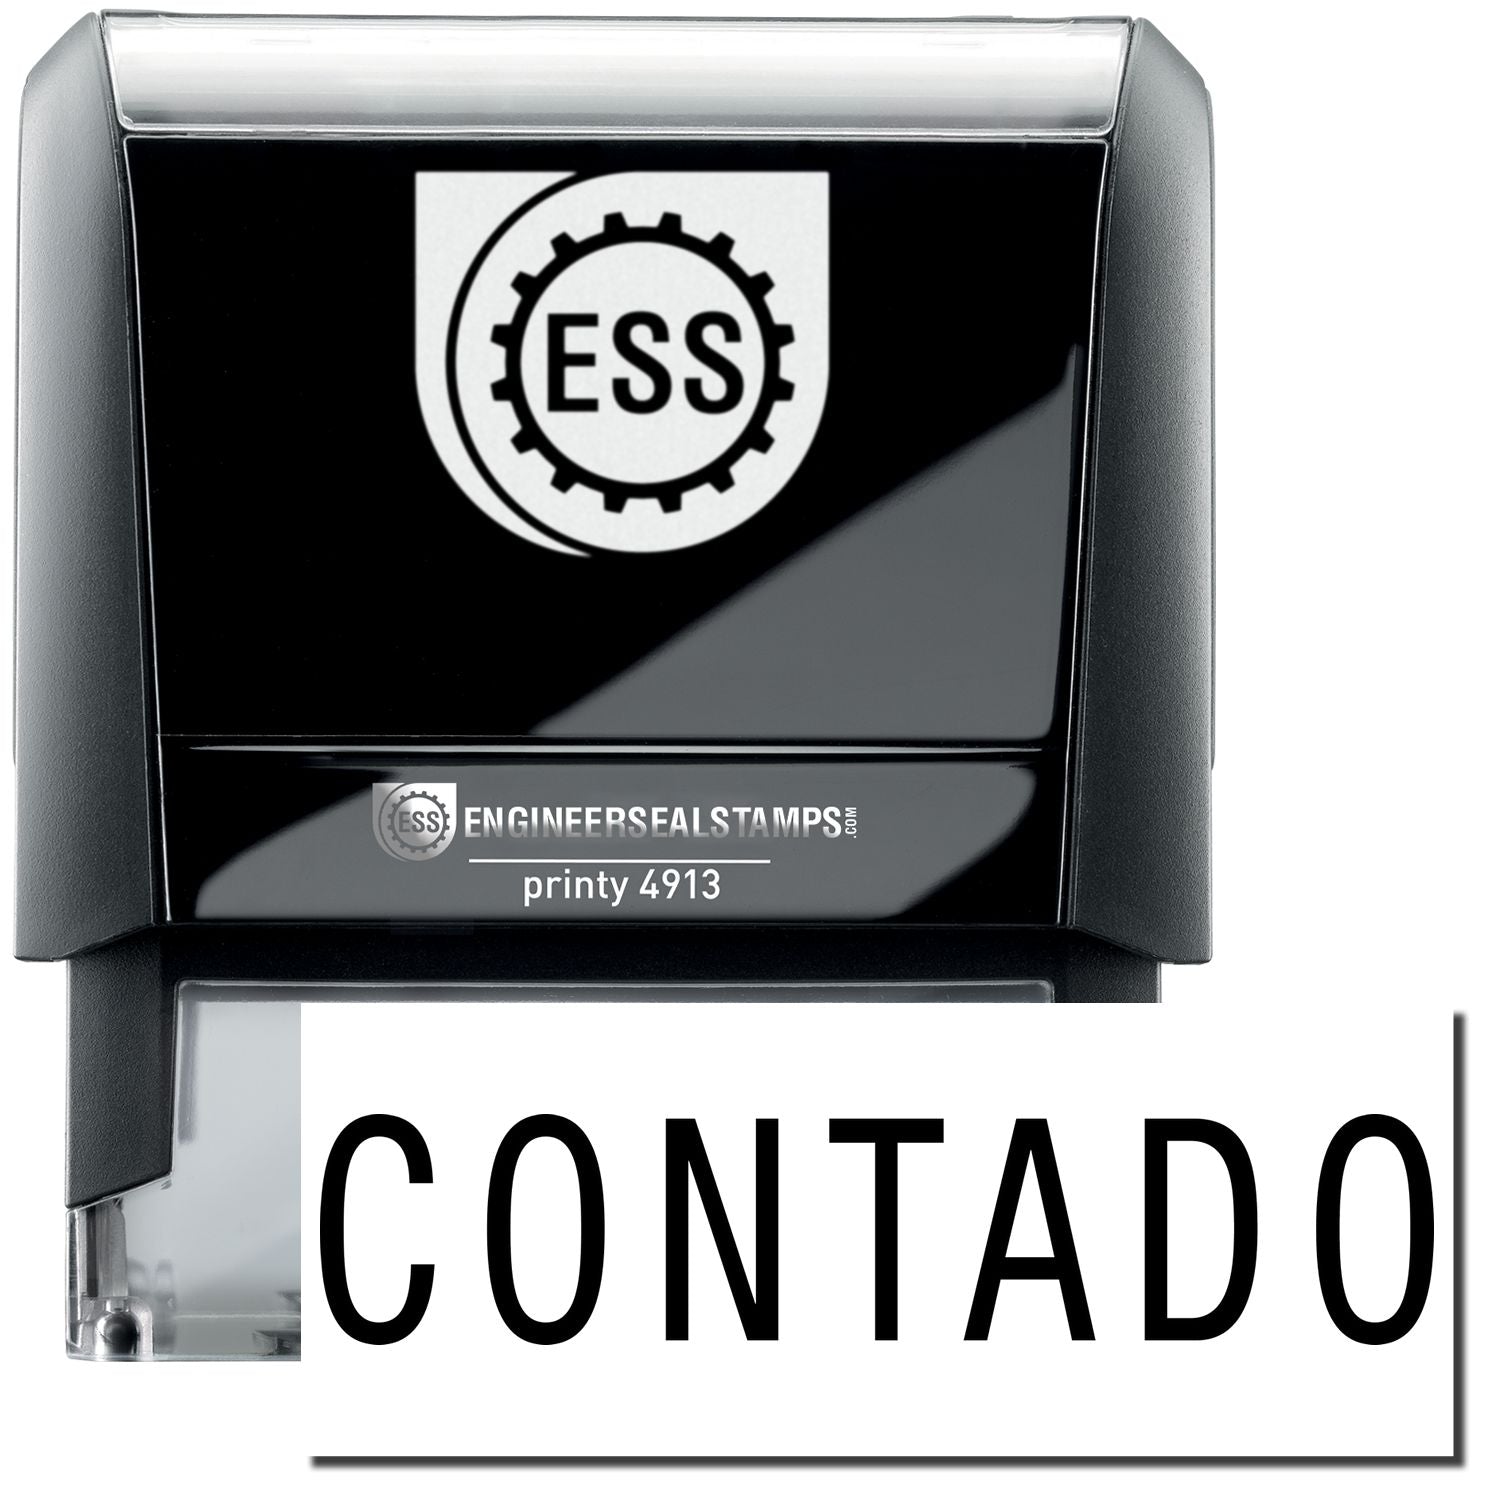 A self-inking stamp with a stamped image showing how the text "CONTADO" in a large font is displayed by it after stamping.